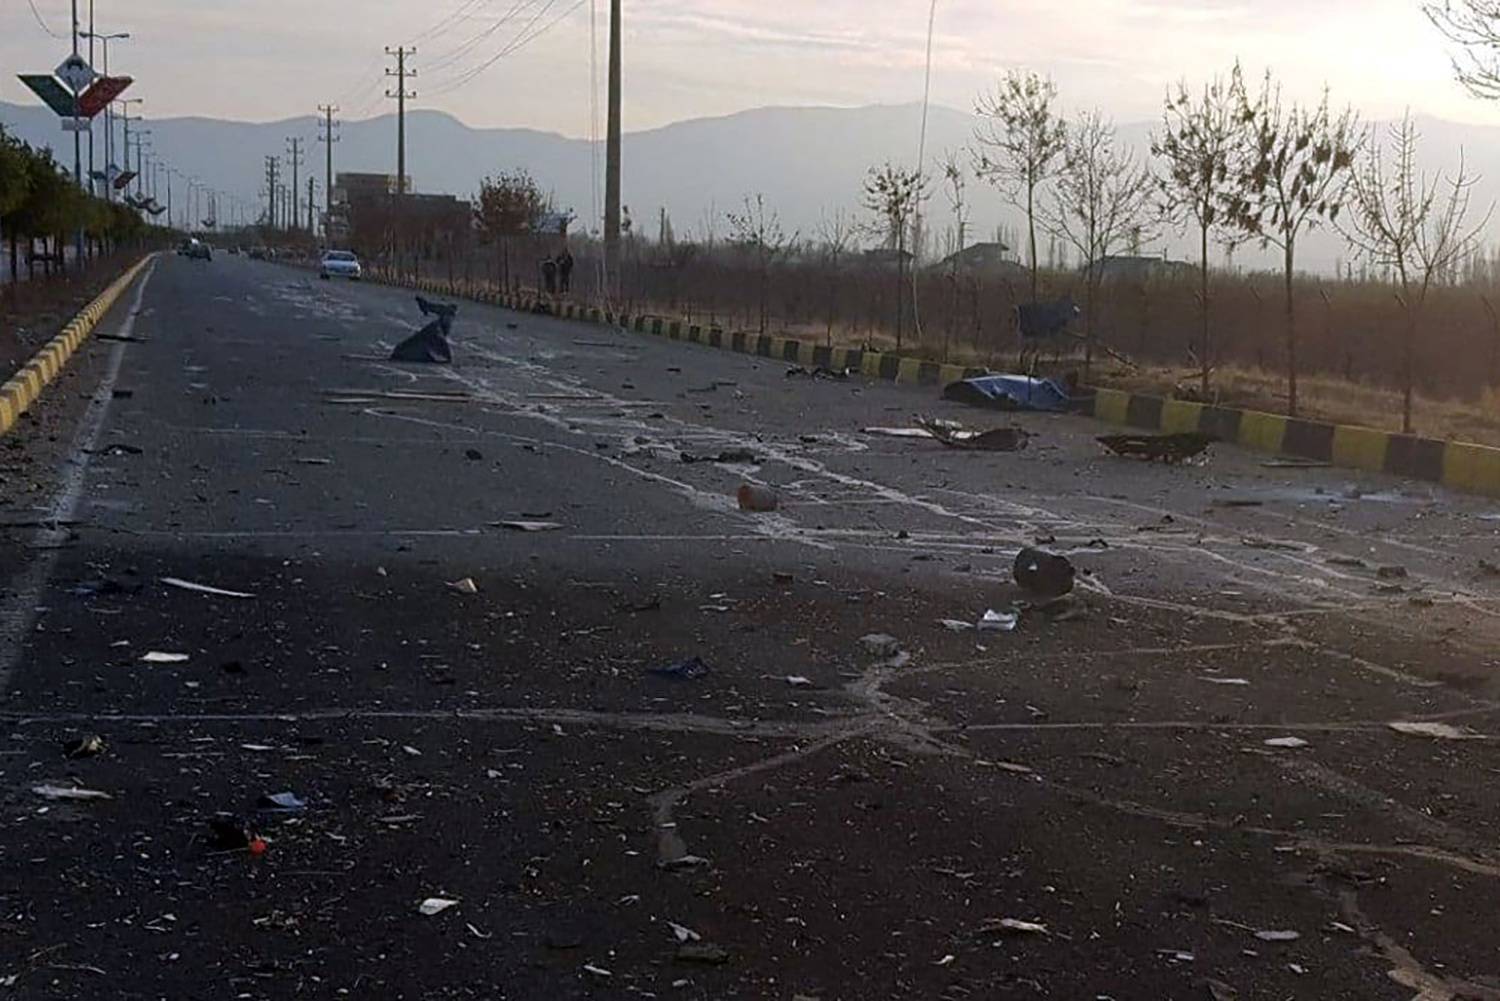 A view shows the site of the attack that killed Prominent Iranian scientist Mohsen Fakhrizadeh, outside Tehran